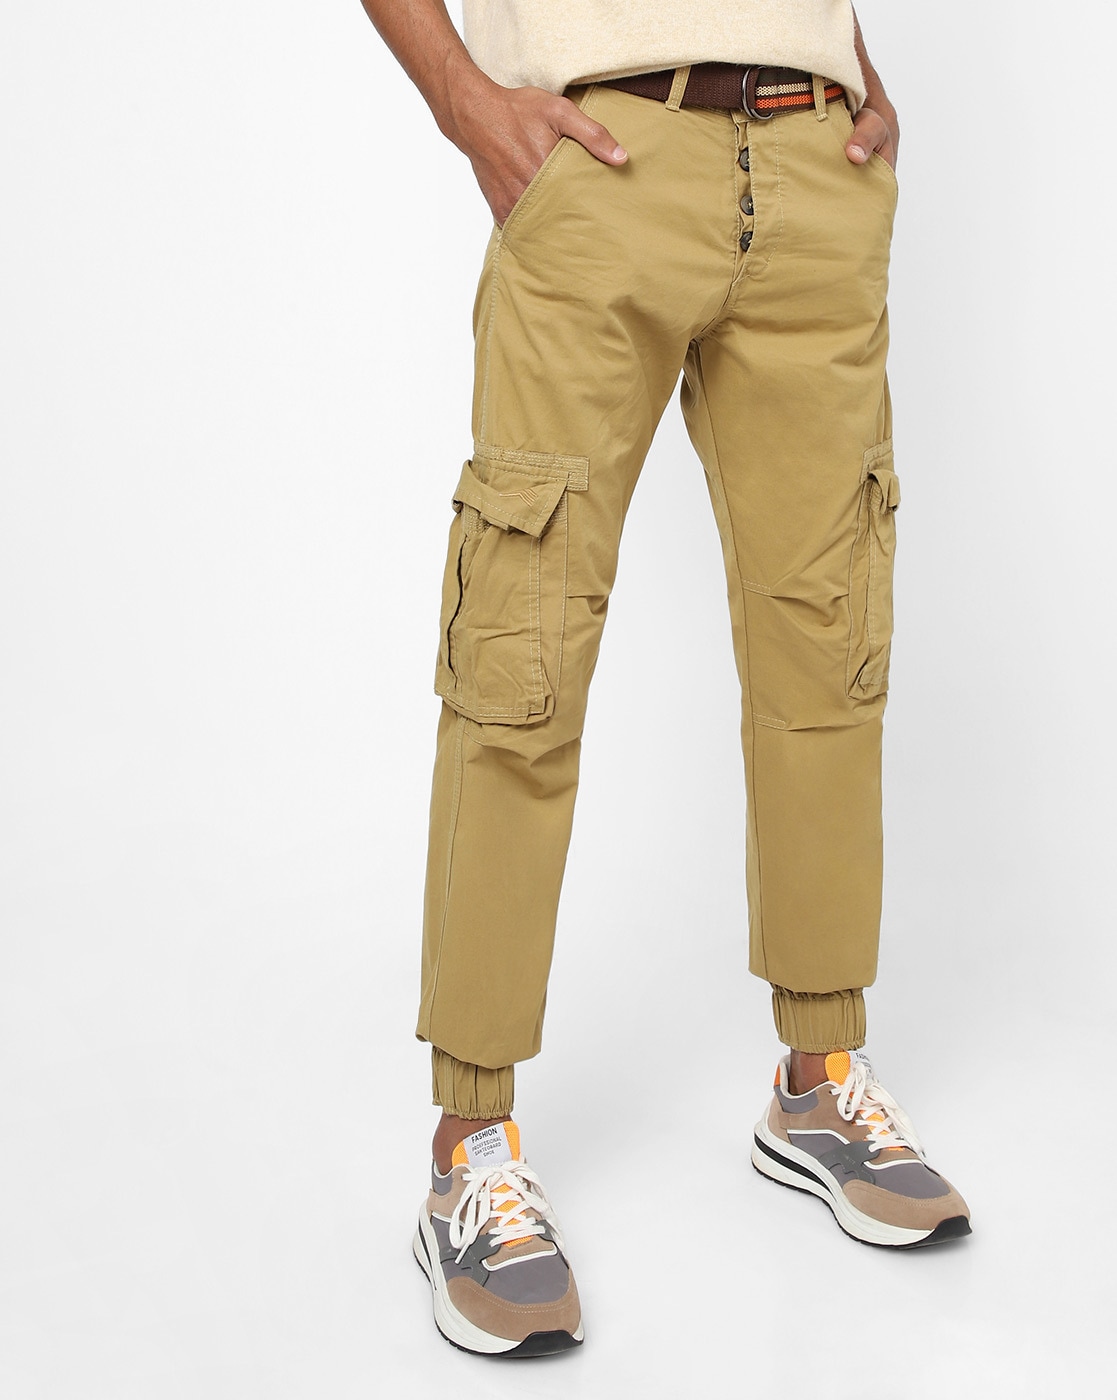 Beige Mens Cargo Pants for Sport and Leisure  Shop Mens Sports Pants   Gym Generation